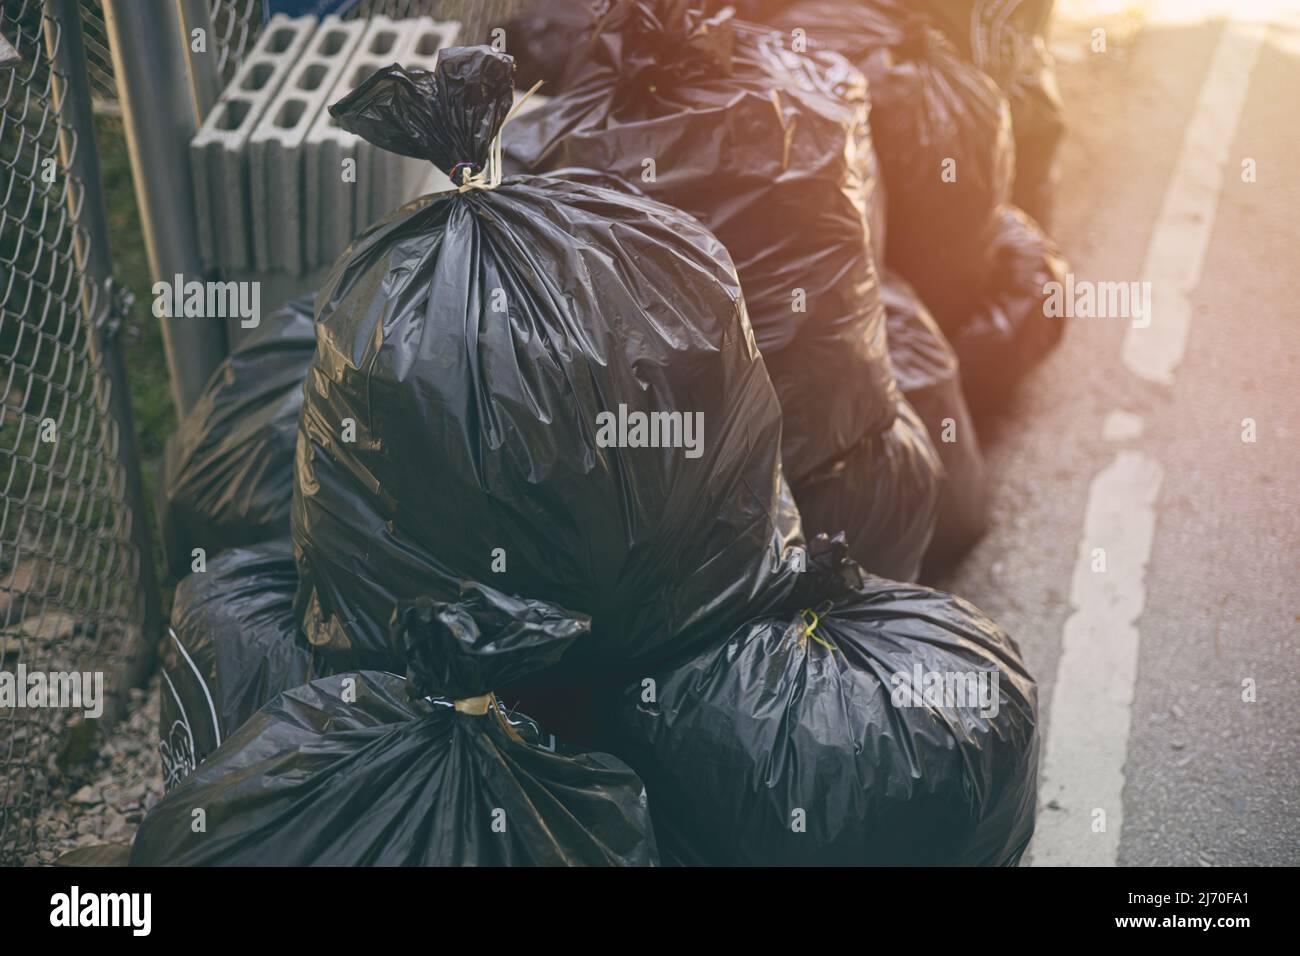 Pile of black Garbage bags. City waste management good hygiene. Stock Photo